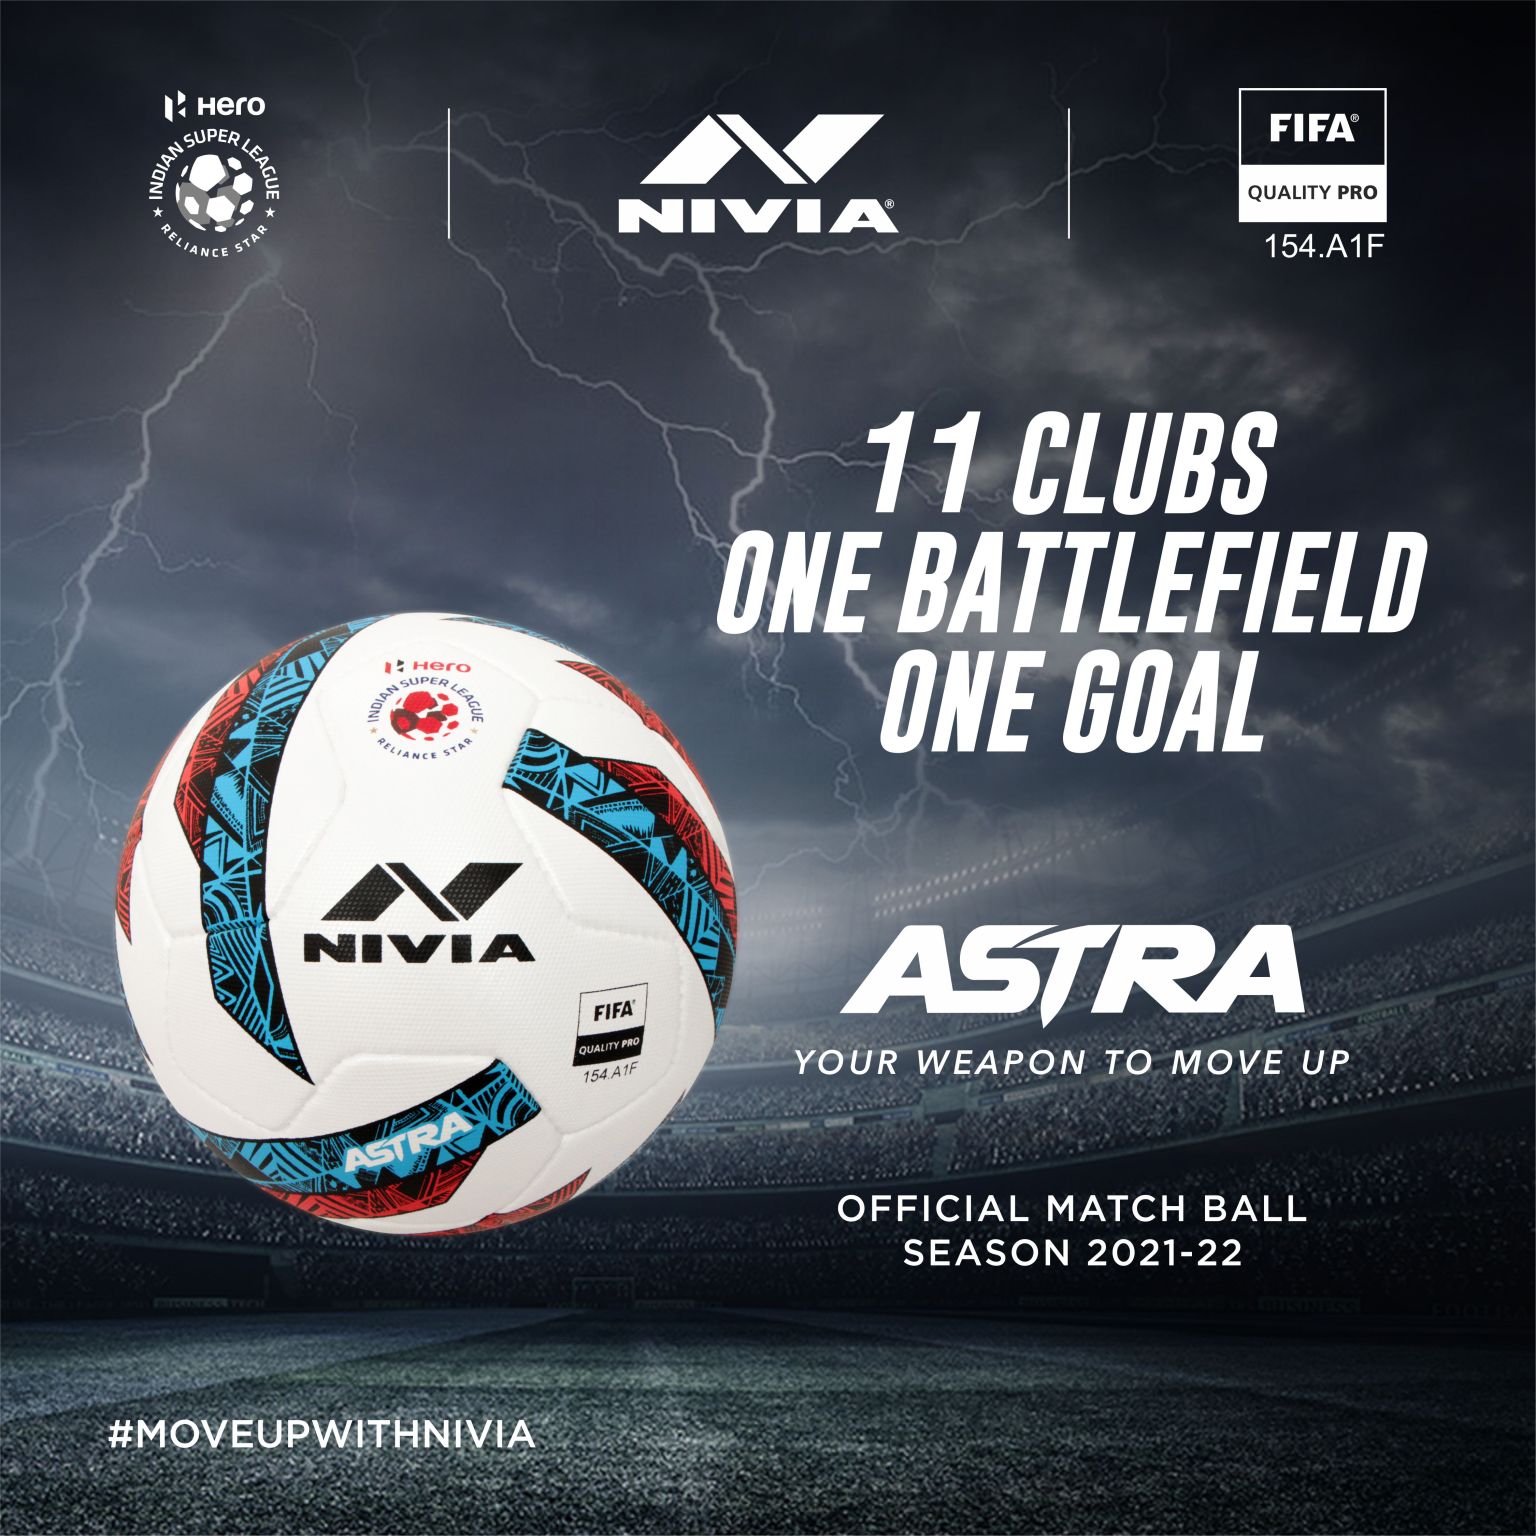 Sportsgully - 'Astra' is the new ISL match Ball⚽